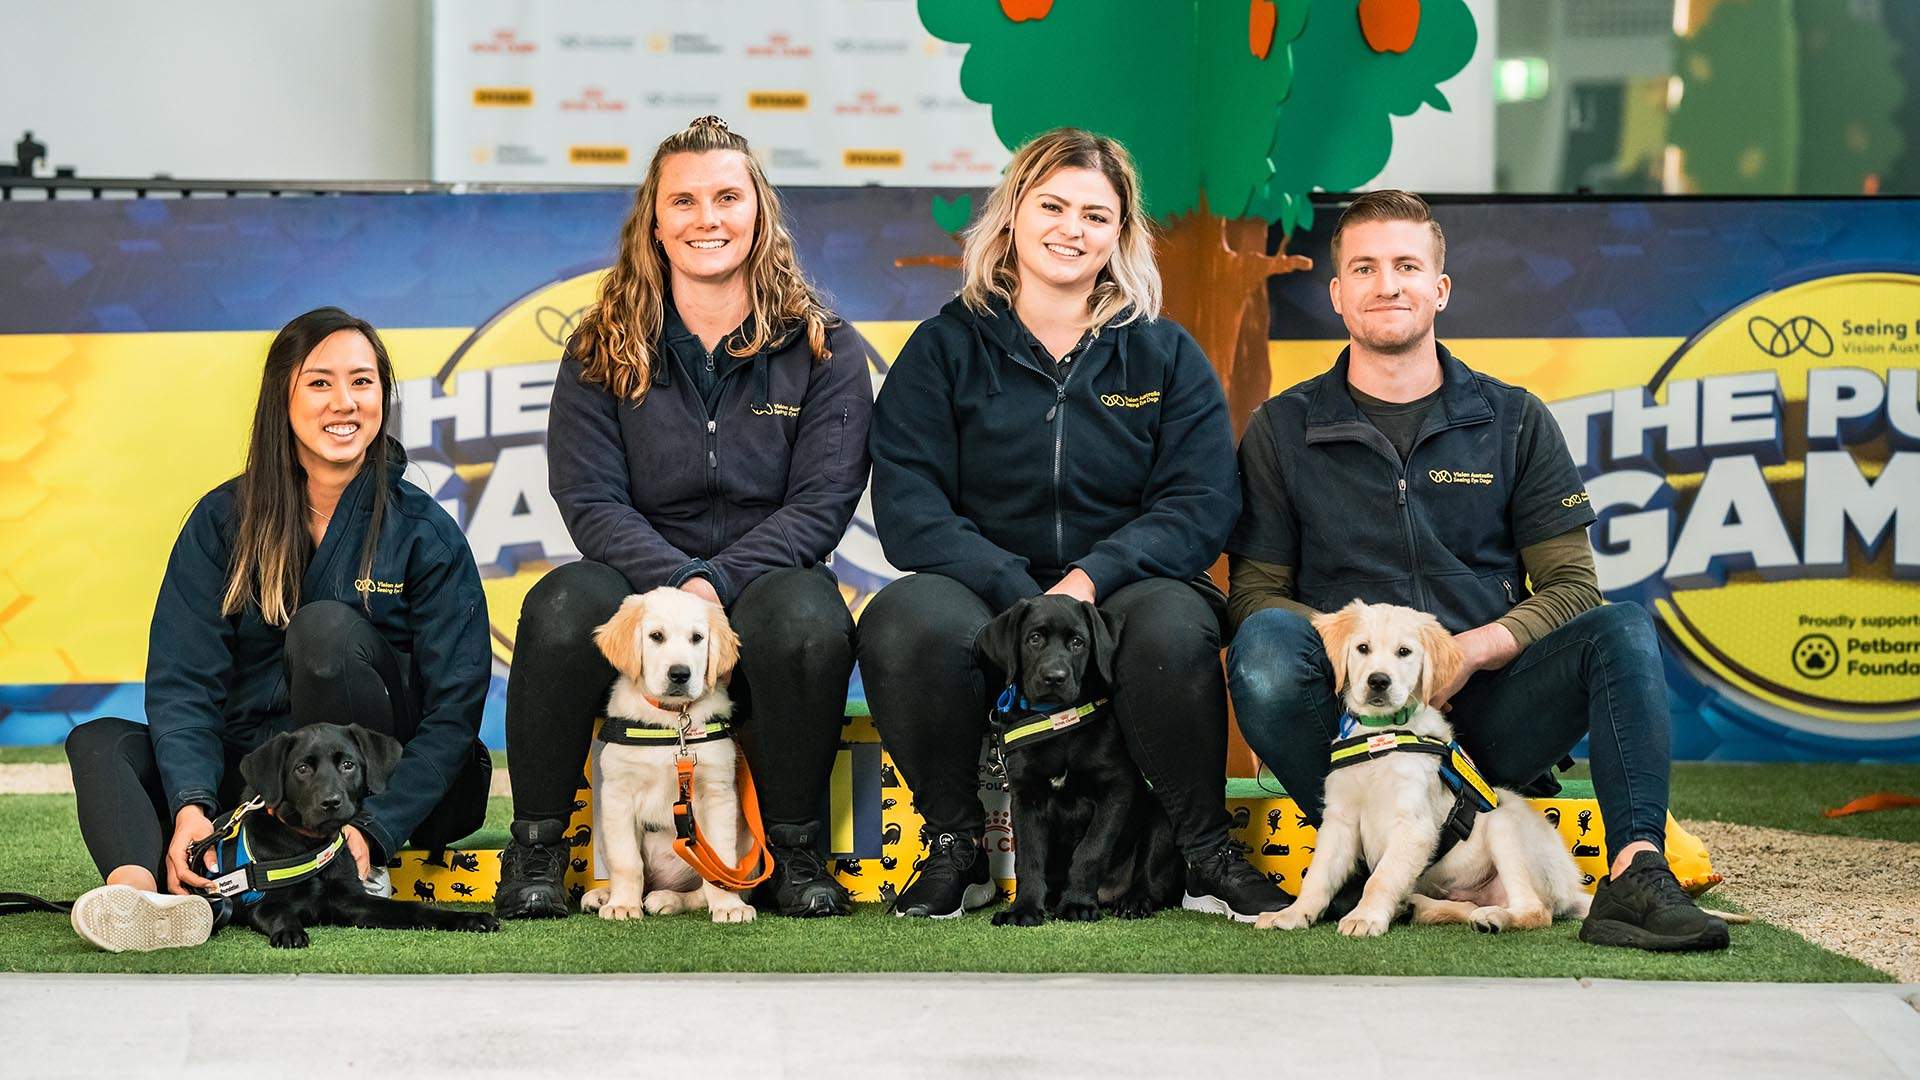 Vision Australia Is Bringing Back Its Adorable Seeing Eye Dogs Puppy Games for the Third Year